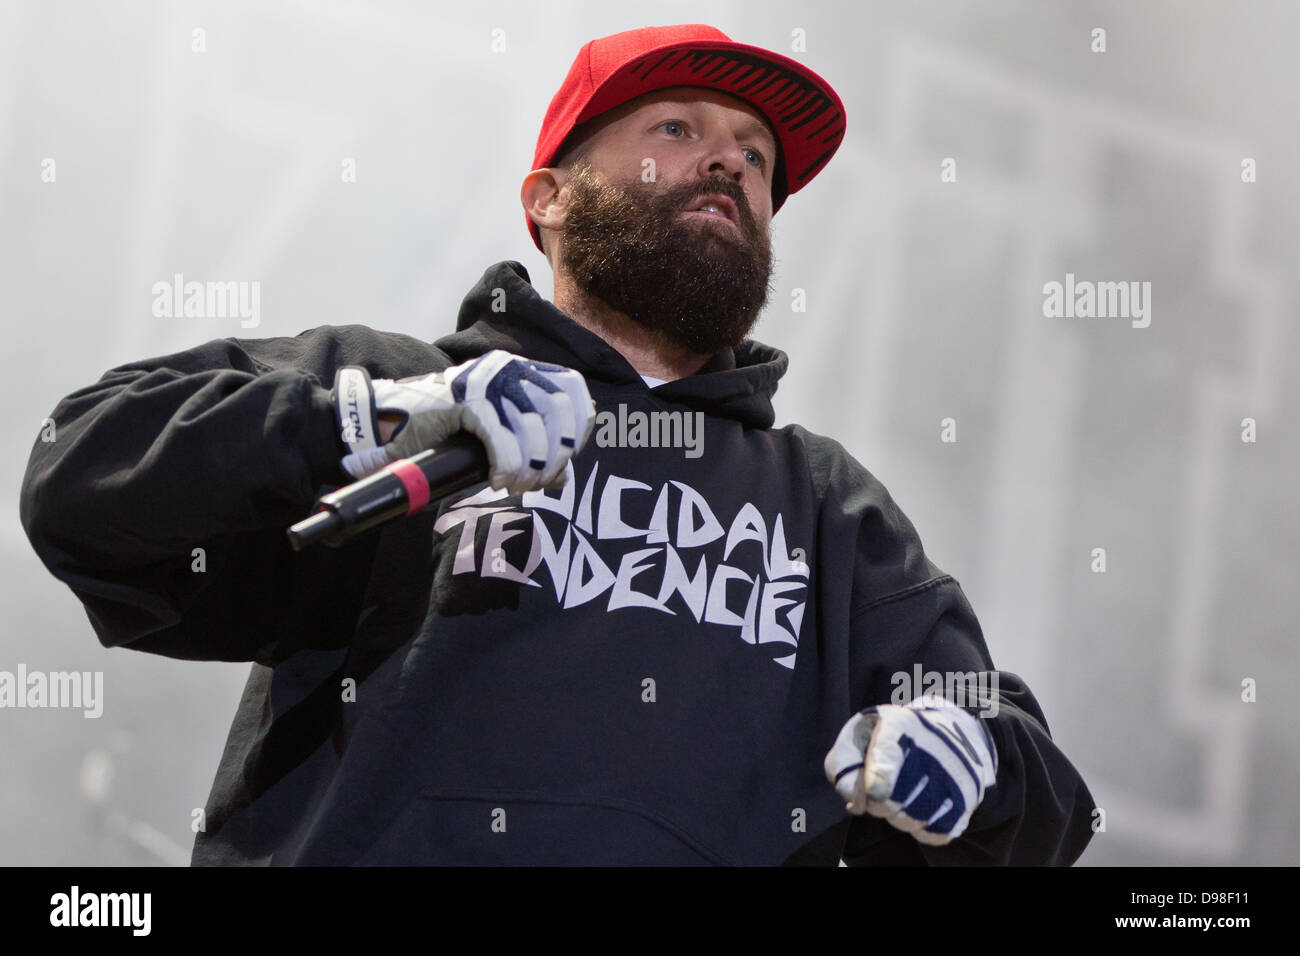 Fred Durst, singer of the US Band Limp Bizkit, performs on a stage of music festival Rock im Park in Nuremberg, Germany, 09 June 2013. More than 70,000 fans of rock music were expected at the festival. Photo: DANIEL KARMANN Stock Photo